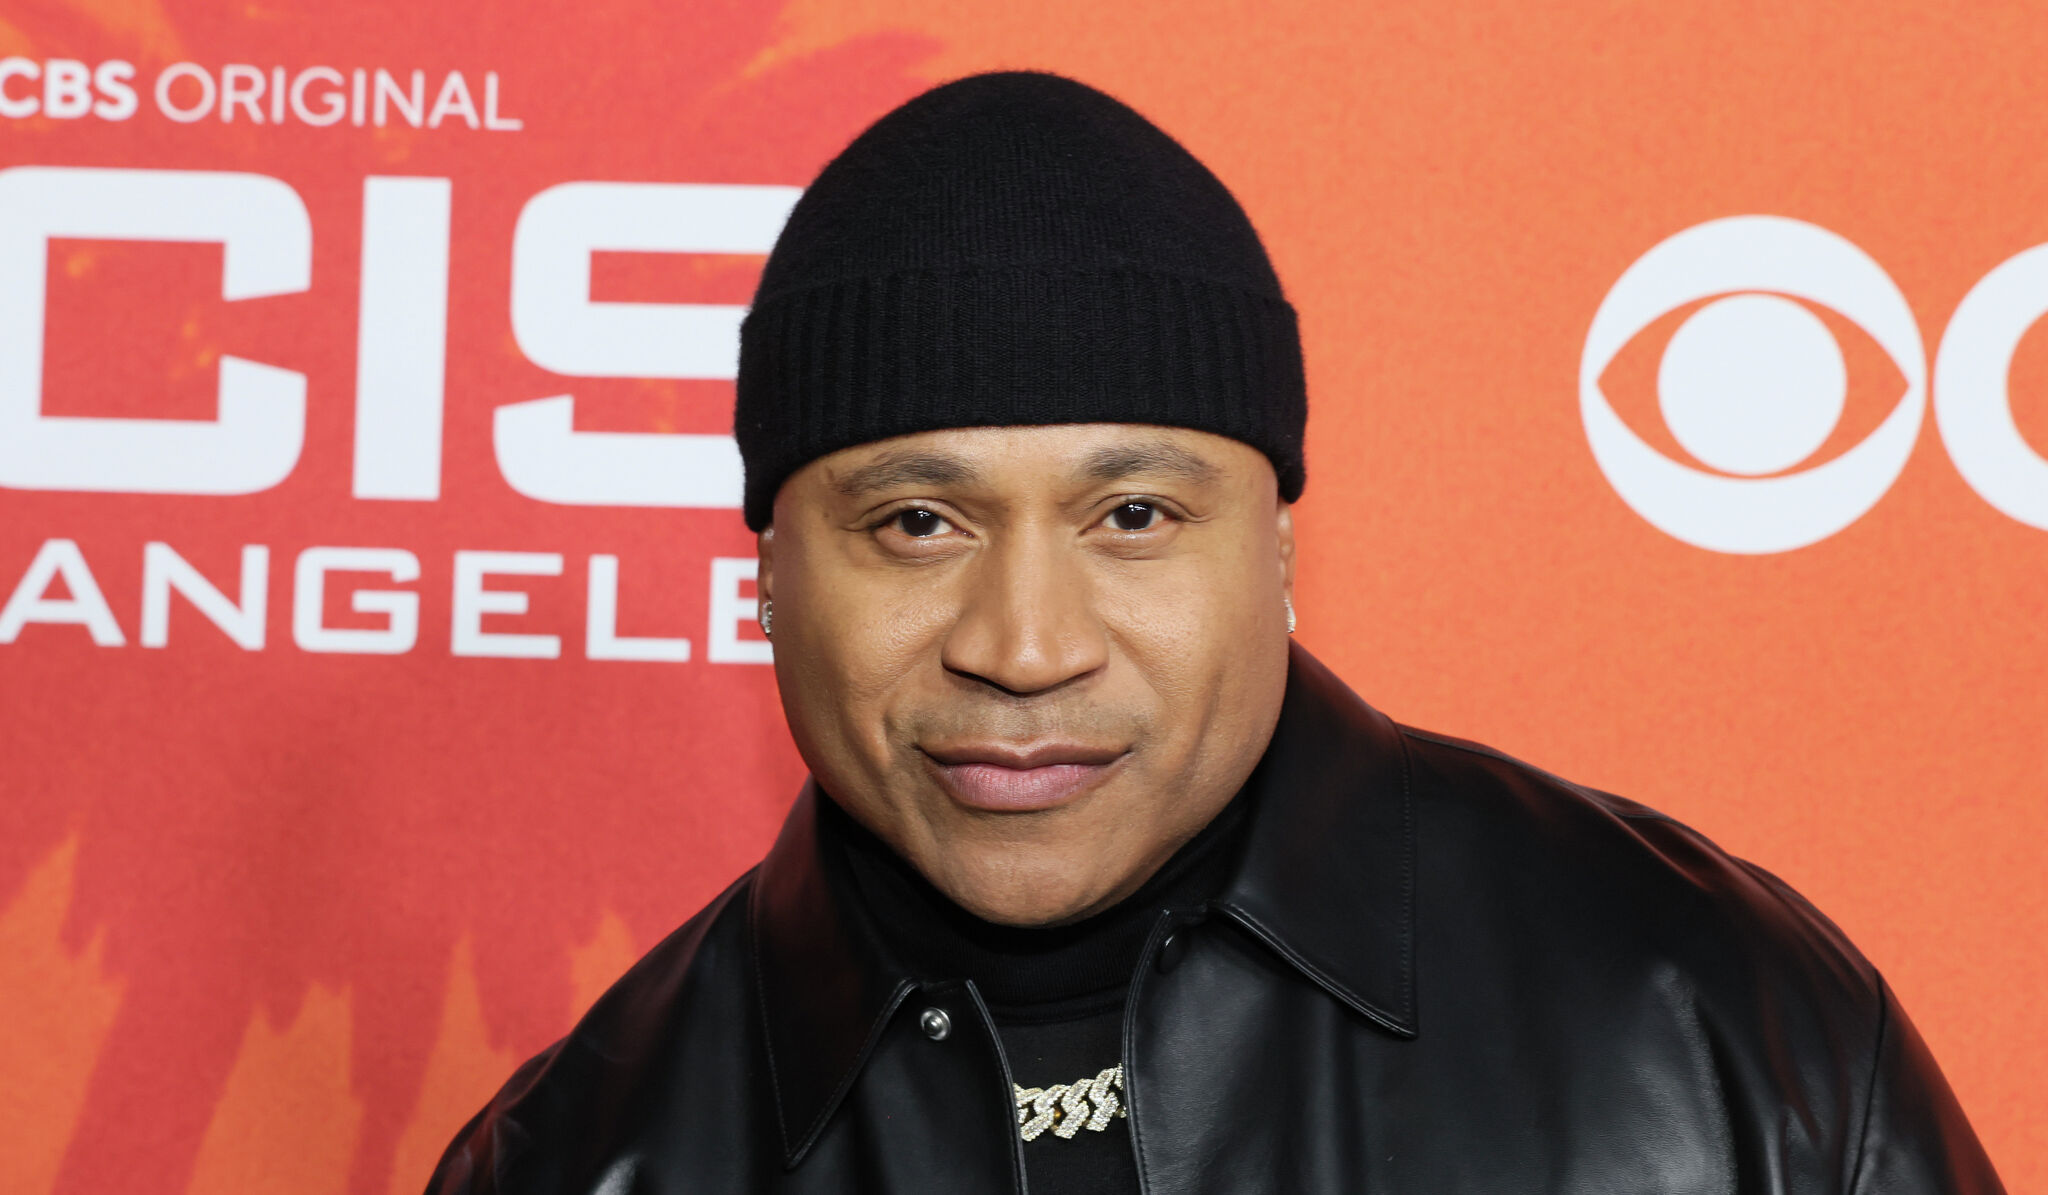 LL Cool J, IceT, Common, others on tour together this summer